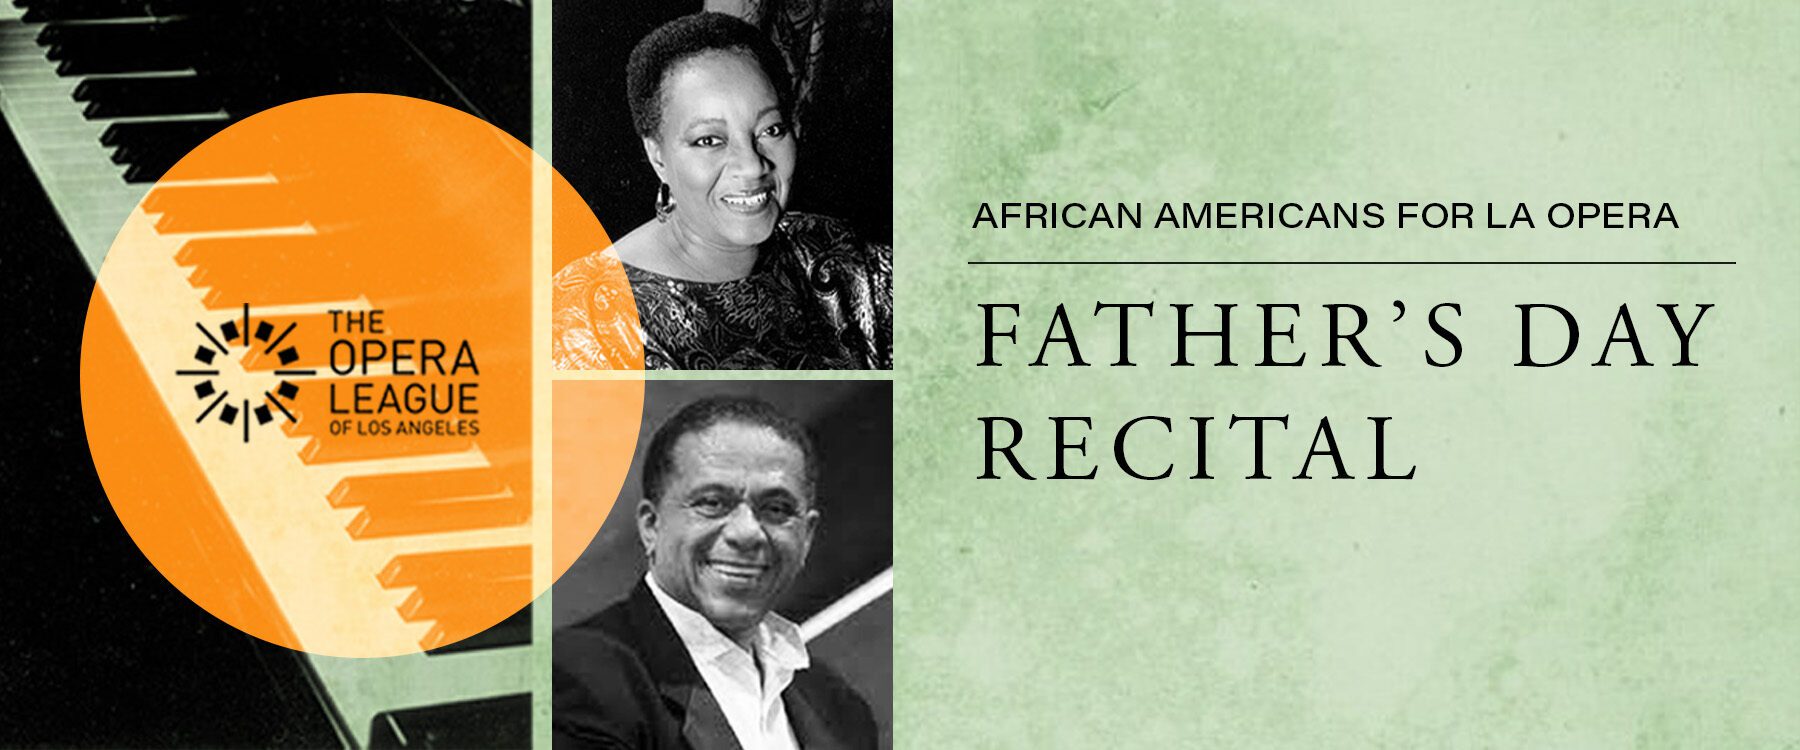 African Americans for LA Opera Father's Day Recital